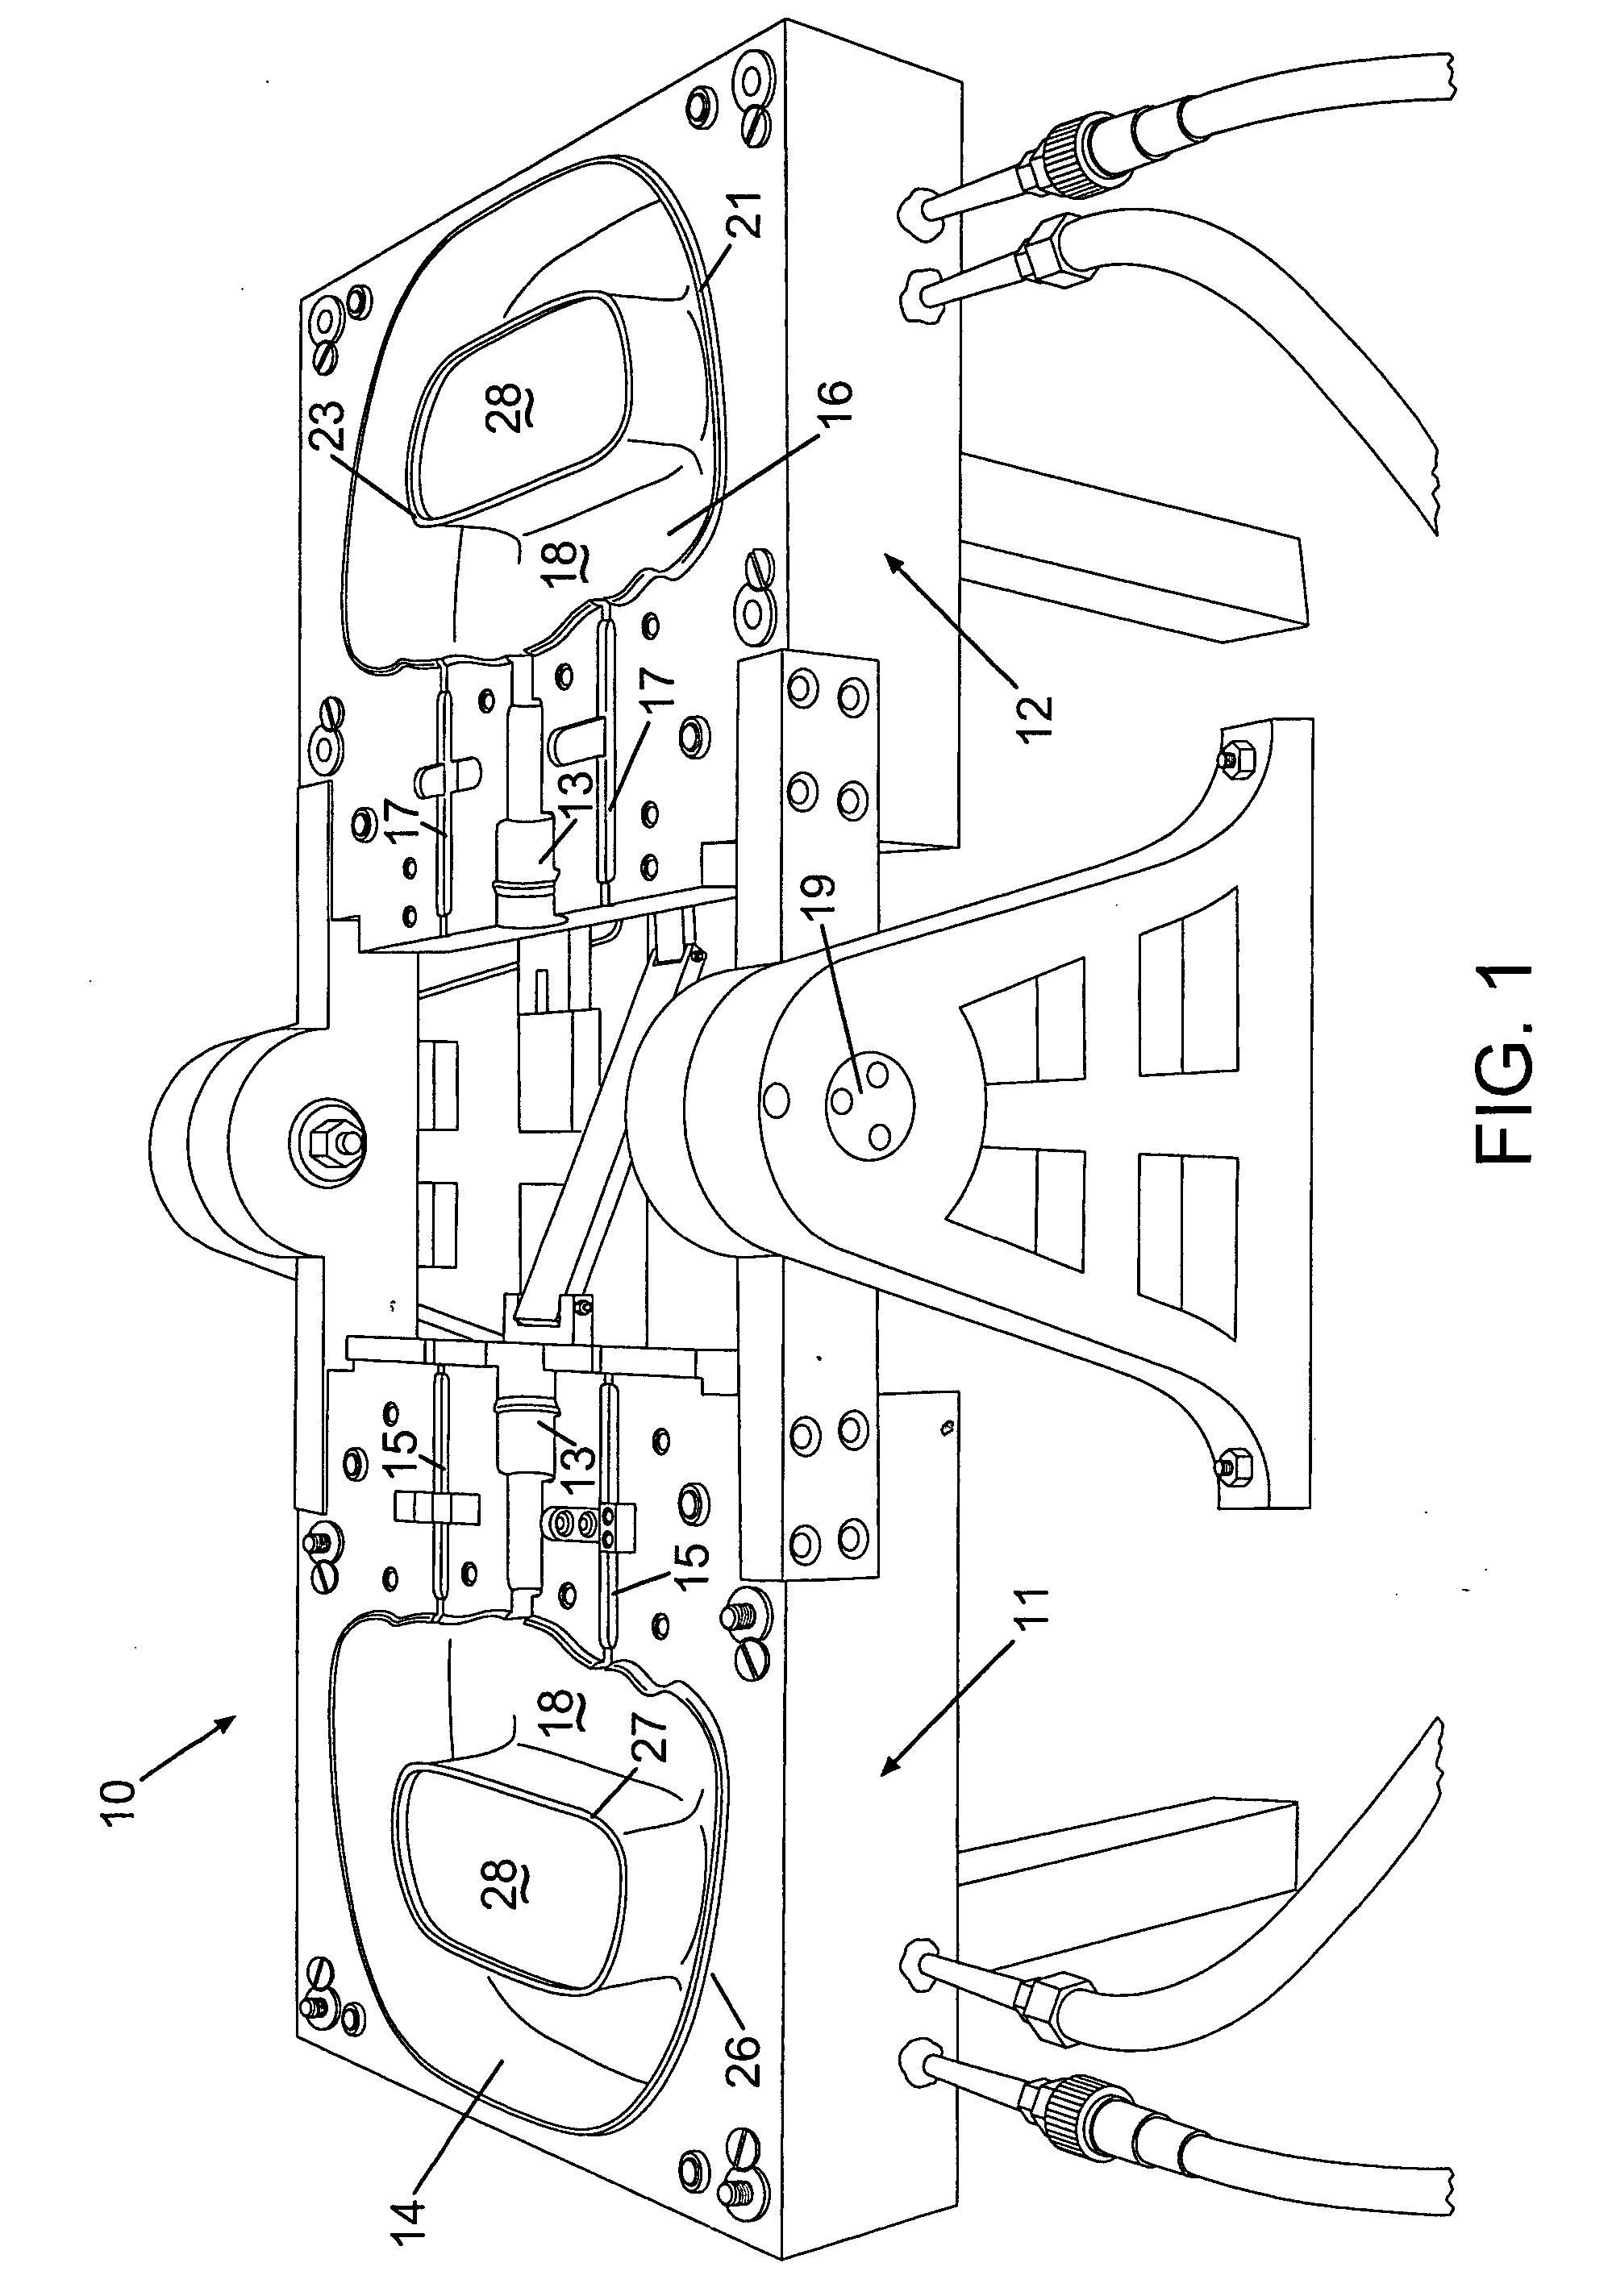 Open style head restraint with closeout and method for making same